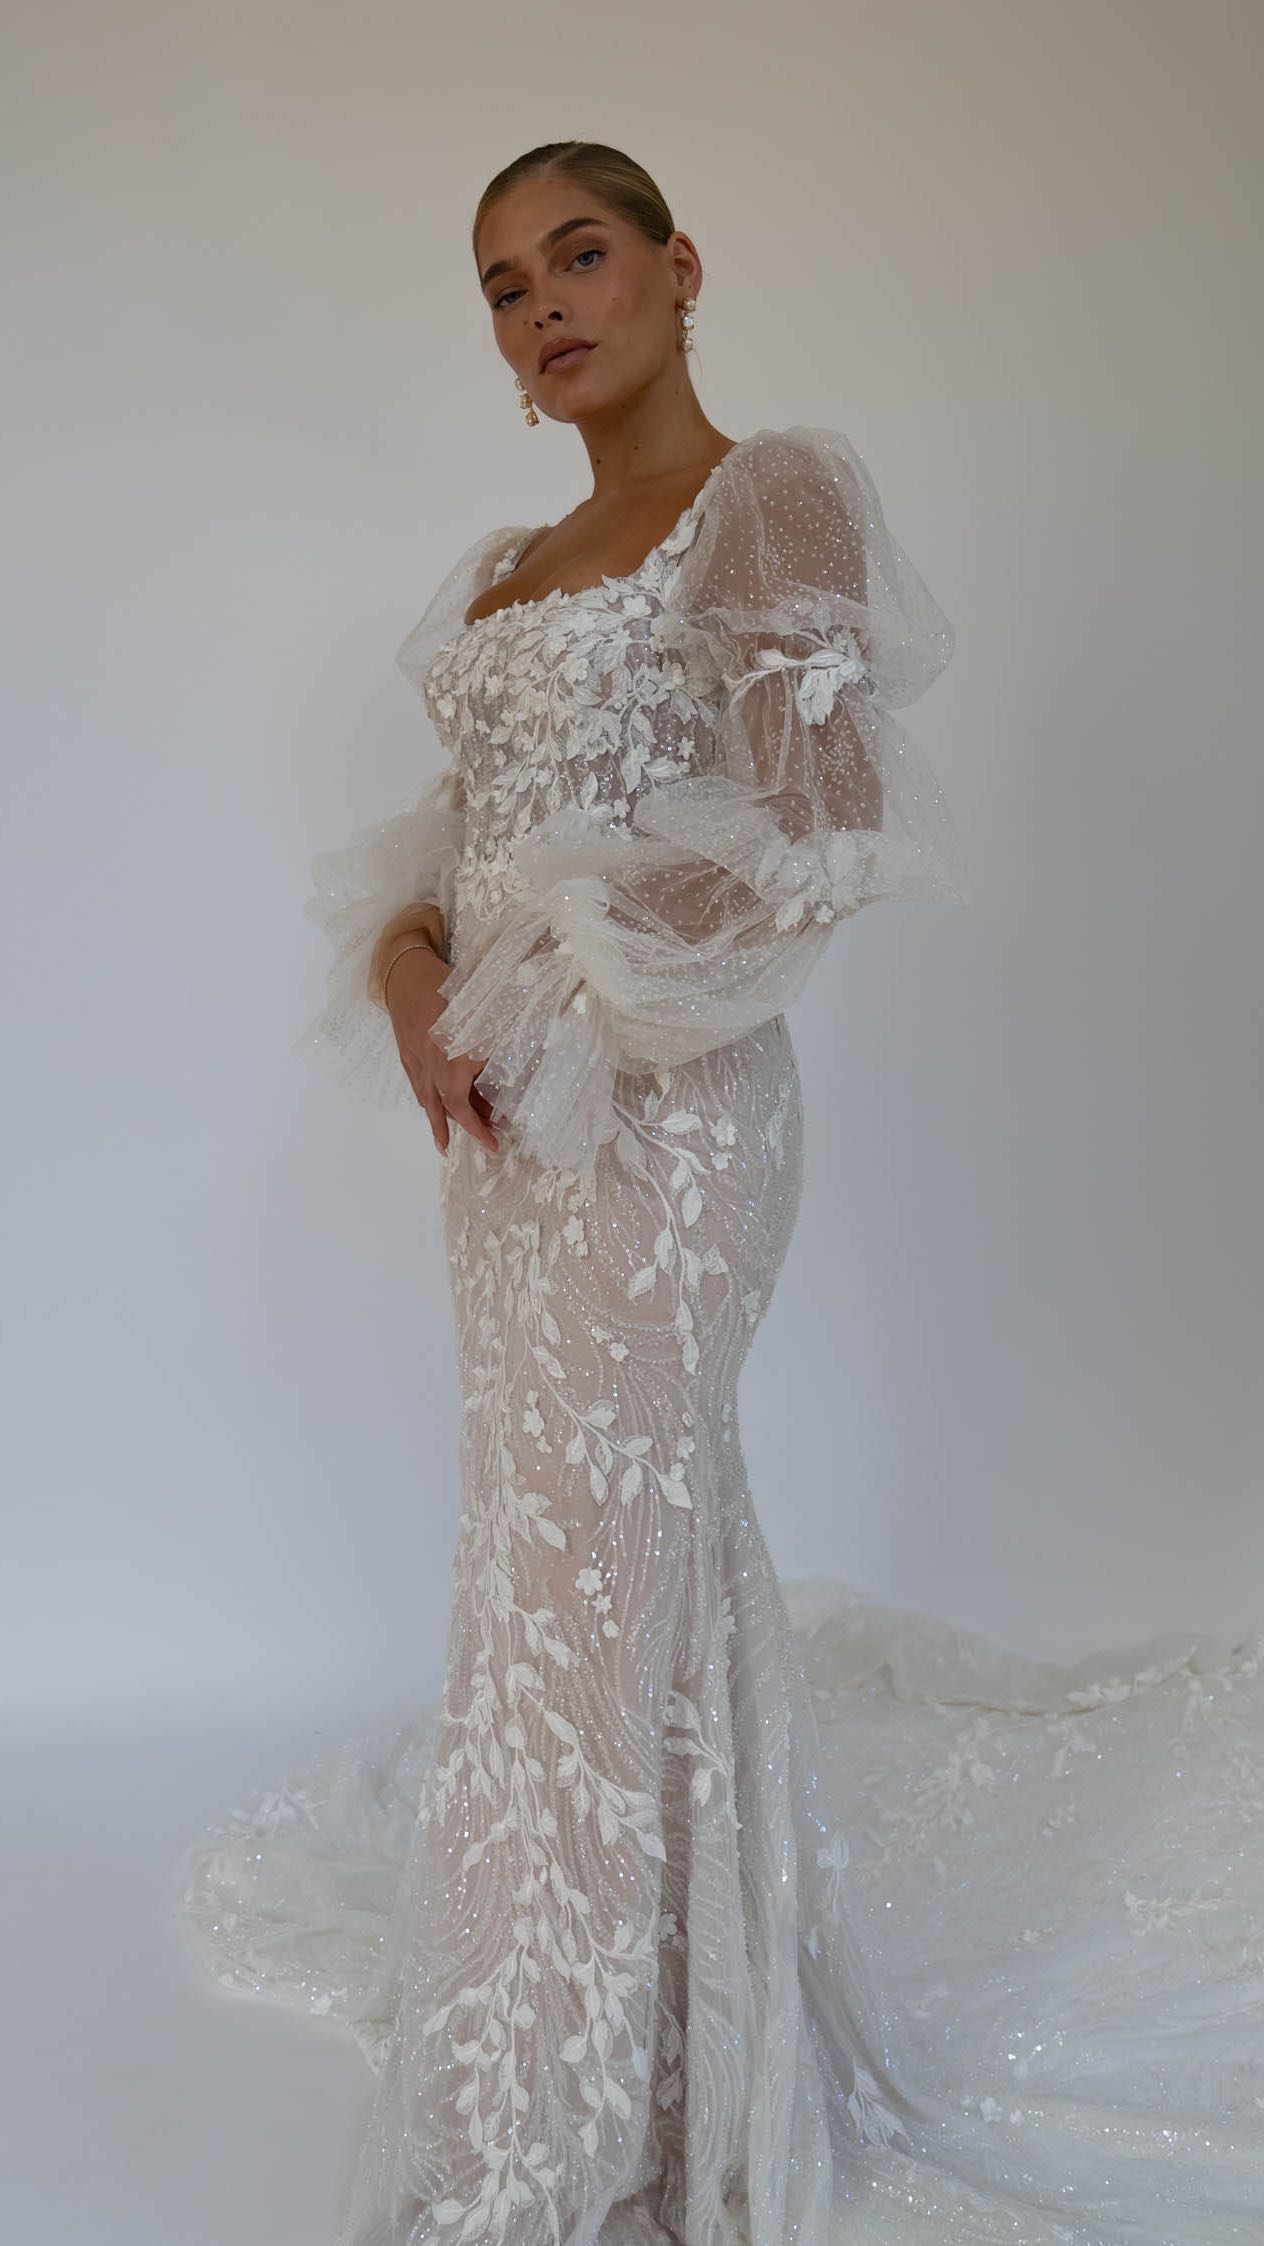 We’re addicted & we just can’t get enough … ◊Make a captivating entrance on your wedding day with MONTREAL by @jeune_bridal , this fit & flare wedding dress exudes sensuality ◊Delicate layers of 3D embroidery, sequins, bead motifs & glitter tulle create a mesmerizing effect, softly flowing into a fit & flare skirt with a horsehair hem & an illusion train ◊Her illusion square neckline bodice with centre back buttons add sophistication, while the detachable balloon sleeves attached to the shoulder straps add a romantic touch ◊#youarepreciousbridal #bridalstudio #newcastlebride #bride #bridalgown #bridalinspo #weddingdress #bride2025 #2024bride #bride2024 #bridalstyle #stylishbride  #bohobride #modernbride #yestothedress #youarepreciousloves #dressoftheday #isaidyes #weddingdressgoals #dressgoals #dreamweddingdress #designerbridal #elegantwedding #jeunebridal #montrealjeunebridal #newtonhall #lepetitchateau #wylambrewery #beamishhall #lartingtonhall